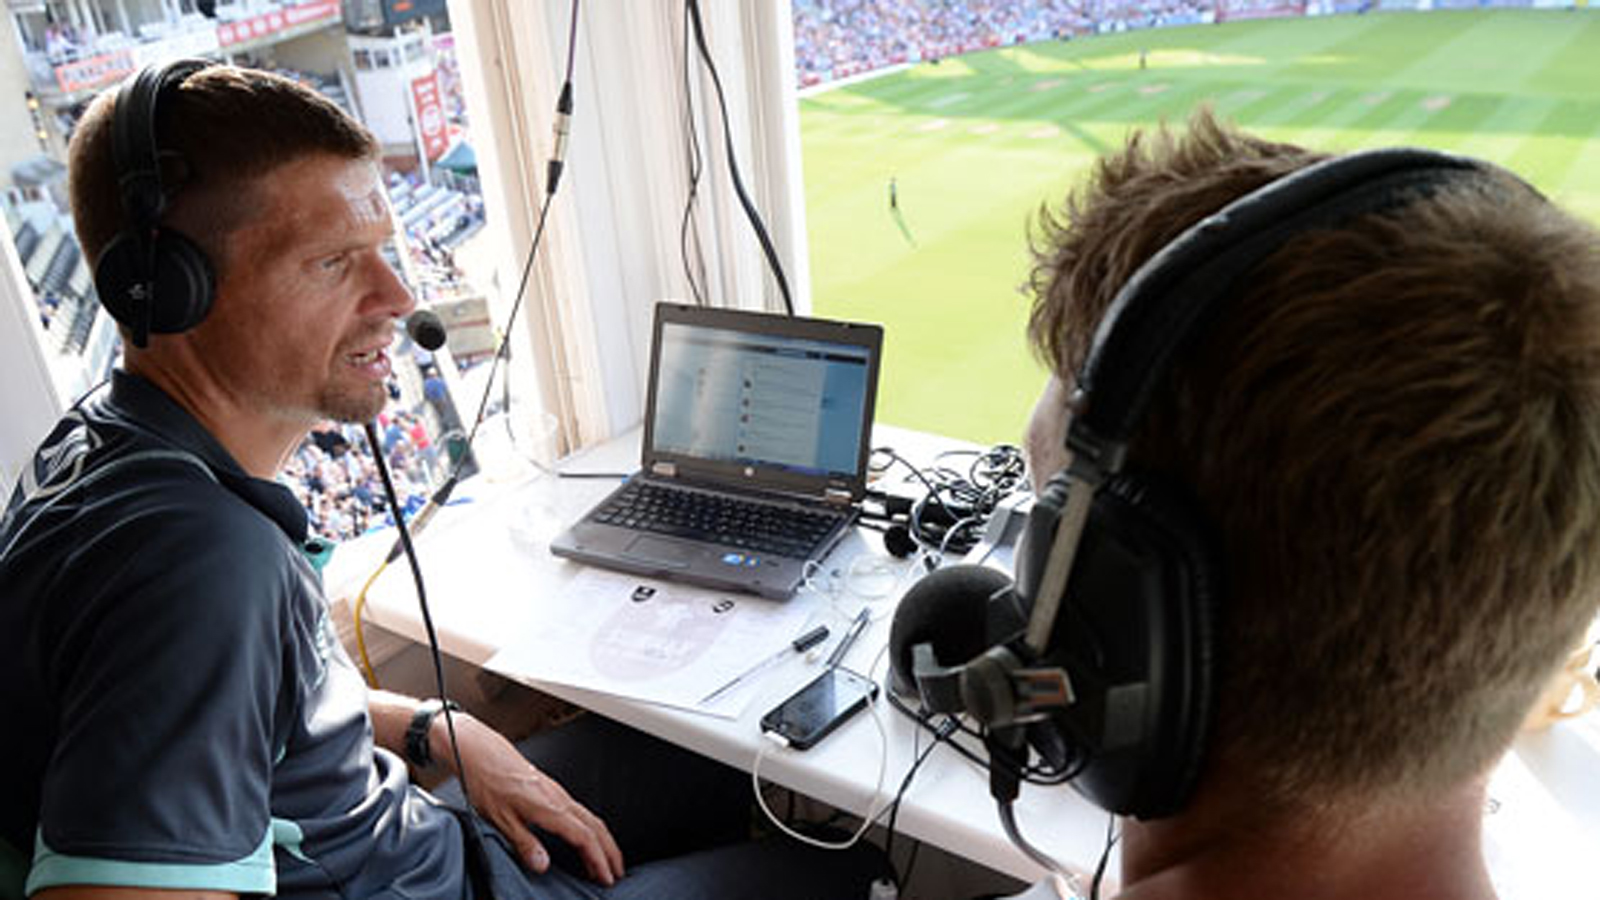 NEW SUMMER PROGRAMME FOR VIRTUAL CRICKET TALKS IN 2021